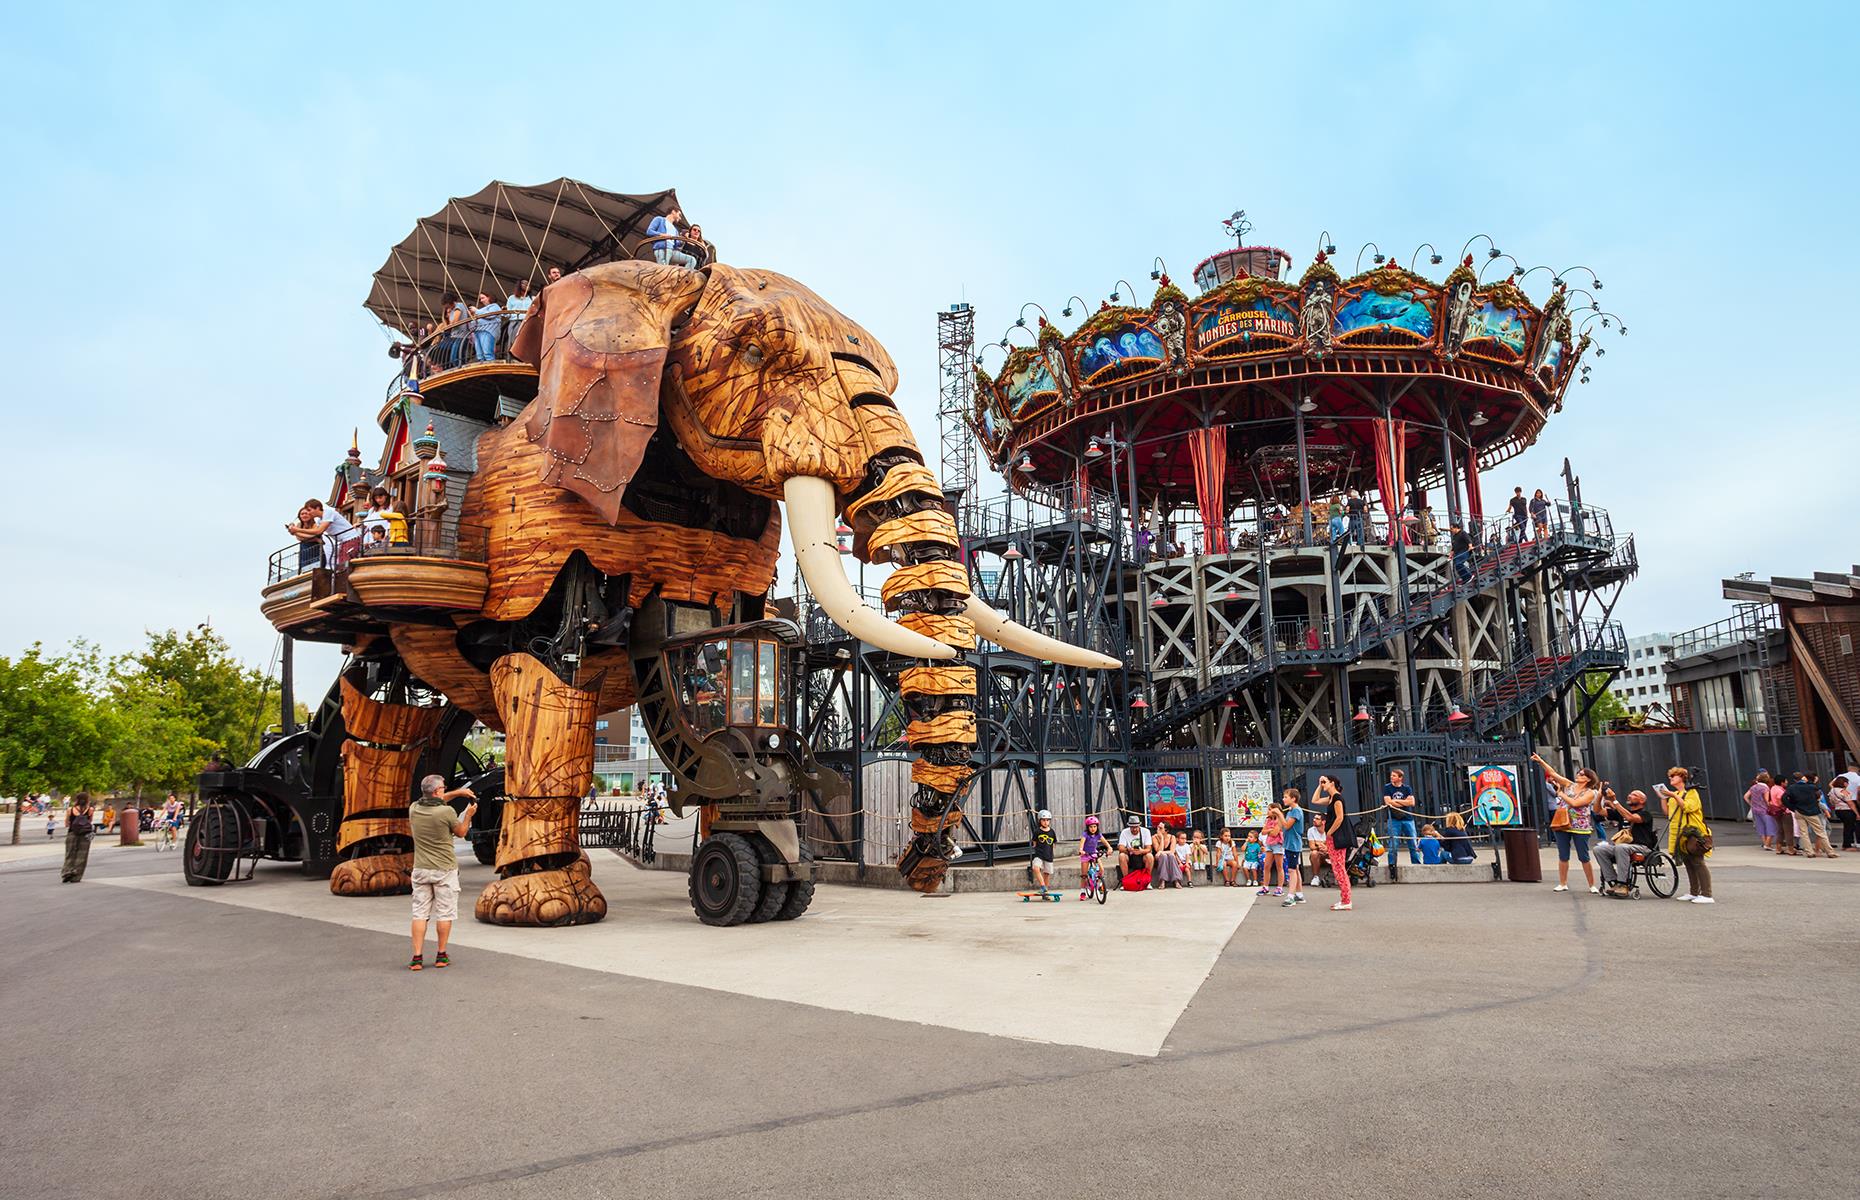 <p>It’s not every day you get to climb aboard a four-storey high mechanical wooden elephant. But Nantes’ <a href="https://www.lesmachines-nantes.fr/en/discover/the-grand-elephant/">Les Machines de l’Île</a> allows you to do just that. As the elephant goes for its walk around an island on the banks of the River Loire, up to 50 people can hitch a ride on the viewing carriage on the elephant’s back and children love watching its levers work, moving the elephant's limbs and head as it 'walks'. Also at Les Machines De l'Île are carousels, a flight simulator and more ride-on machines.</p>